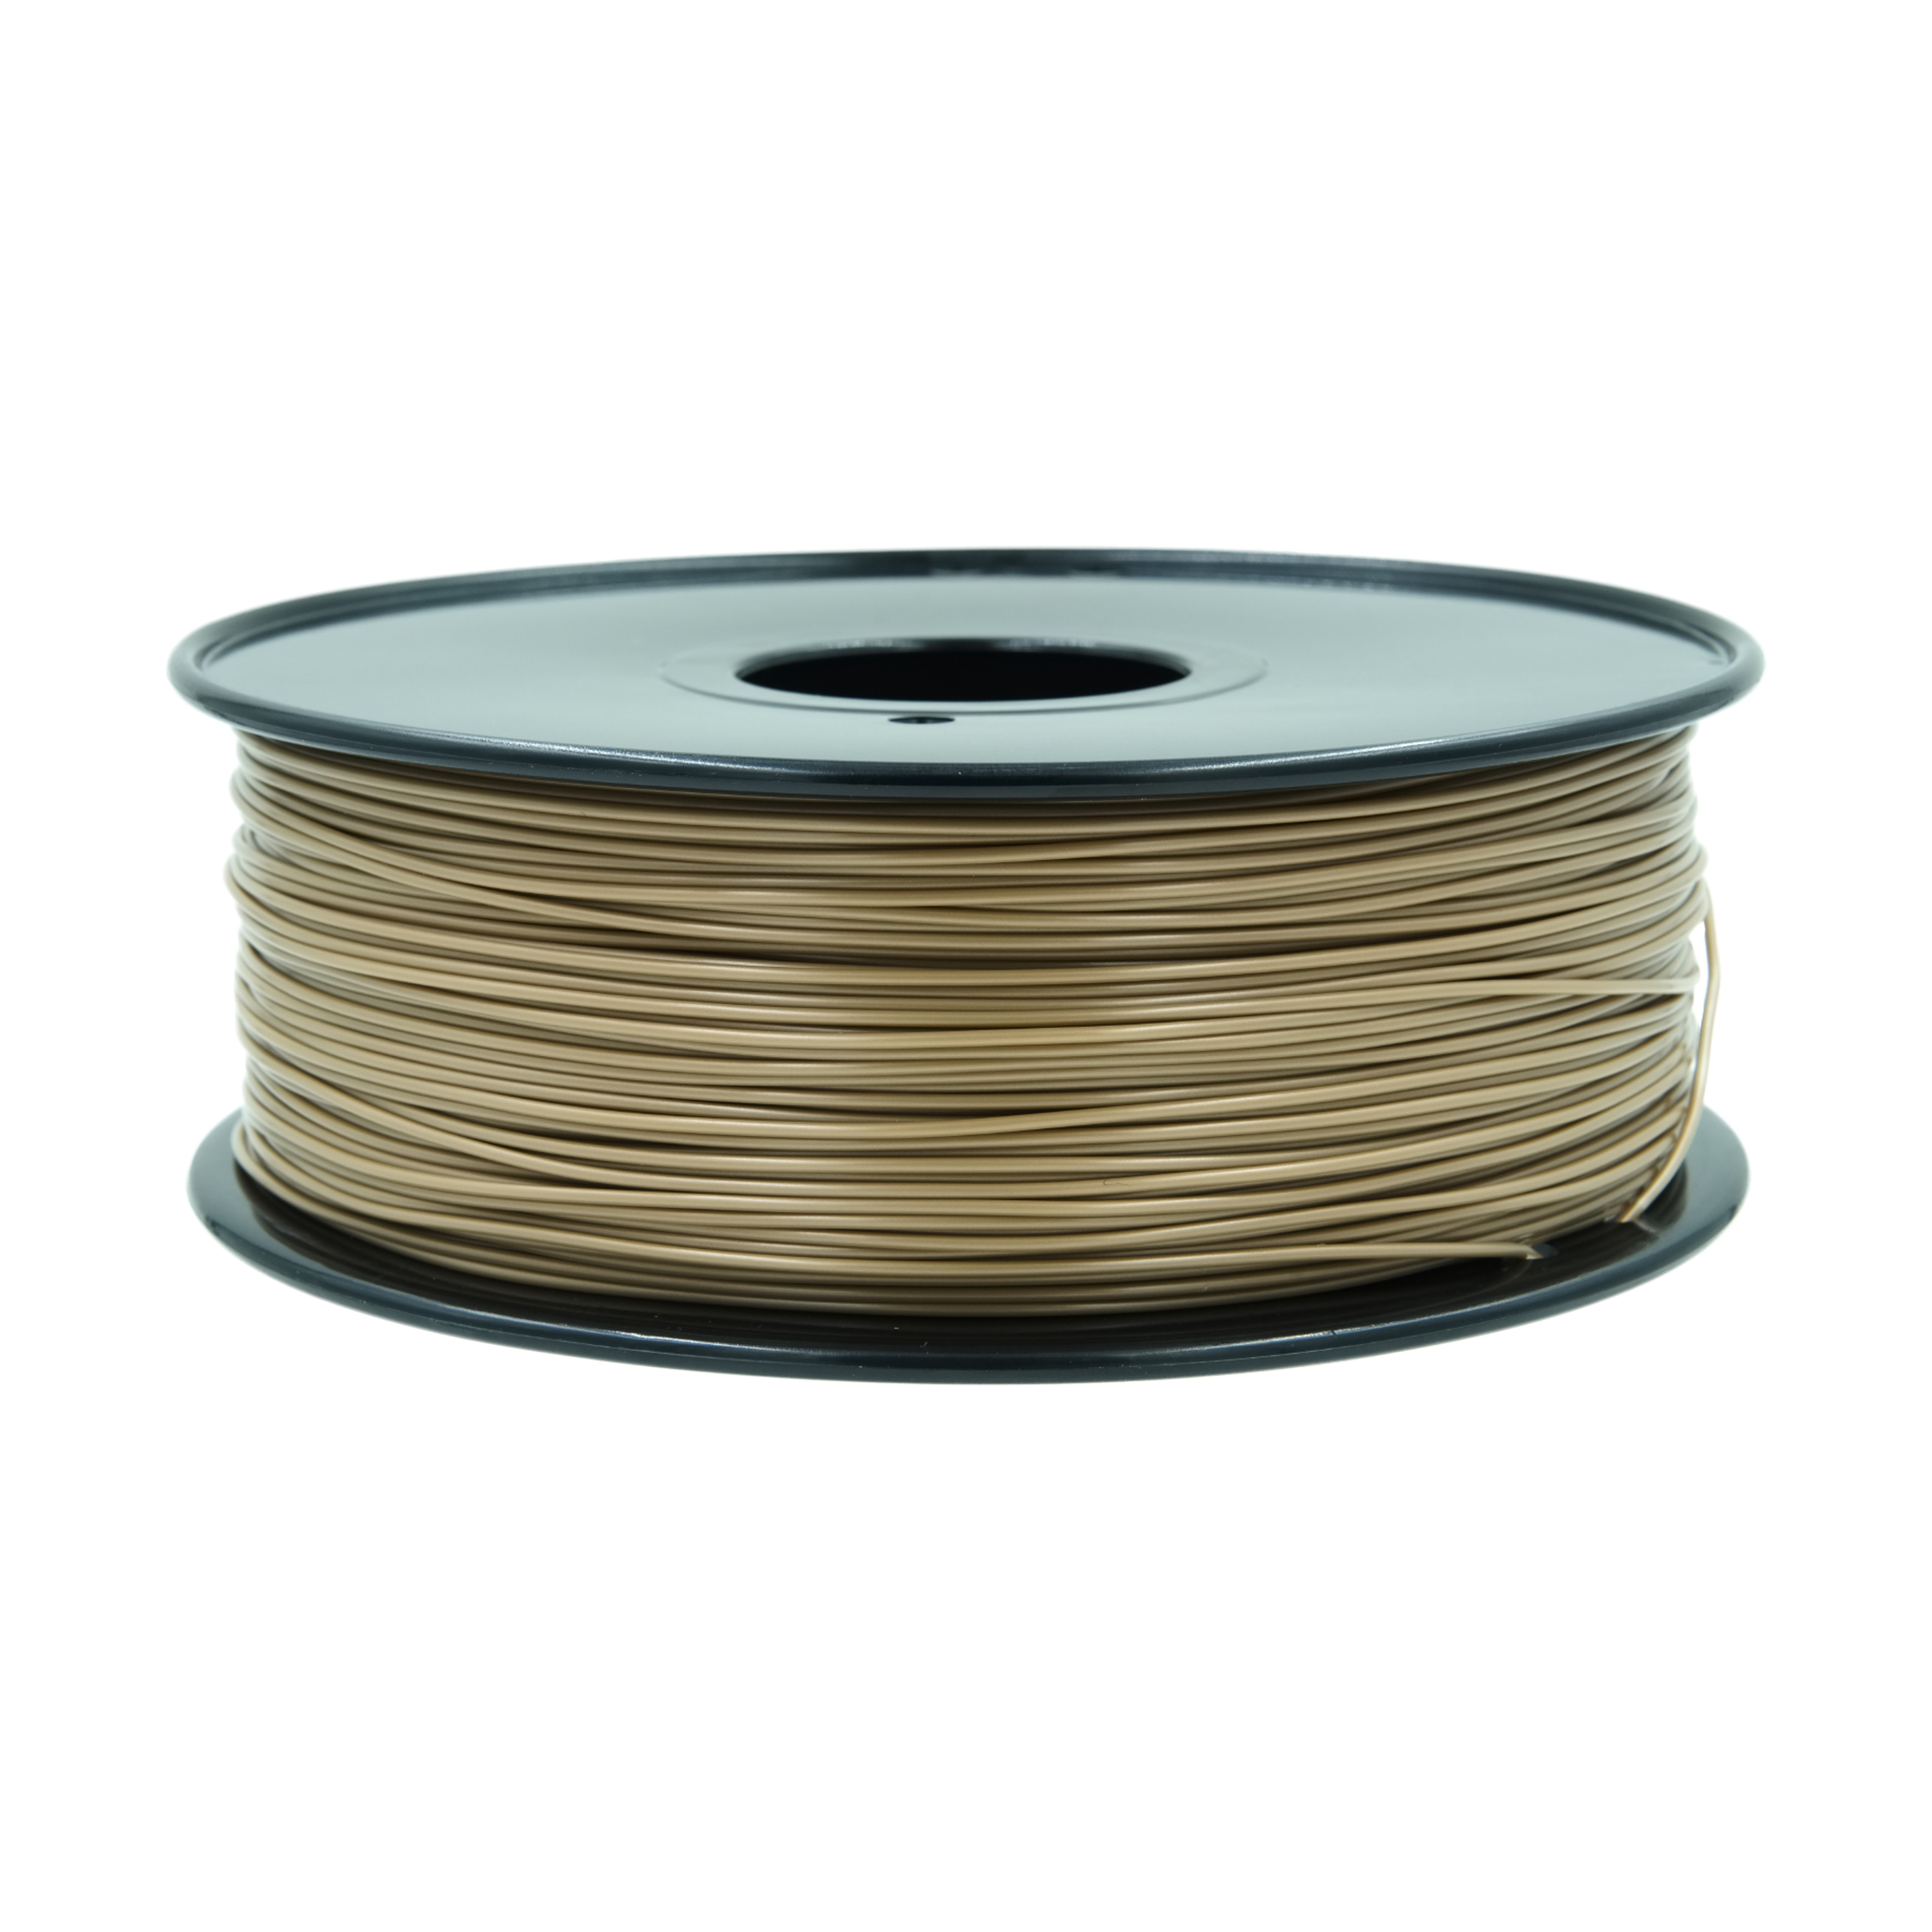 China Recycled 1.75mm ABS 3d Printer Filament 1kg / 2.2lb Customized Color wholesale